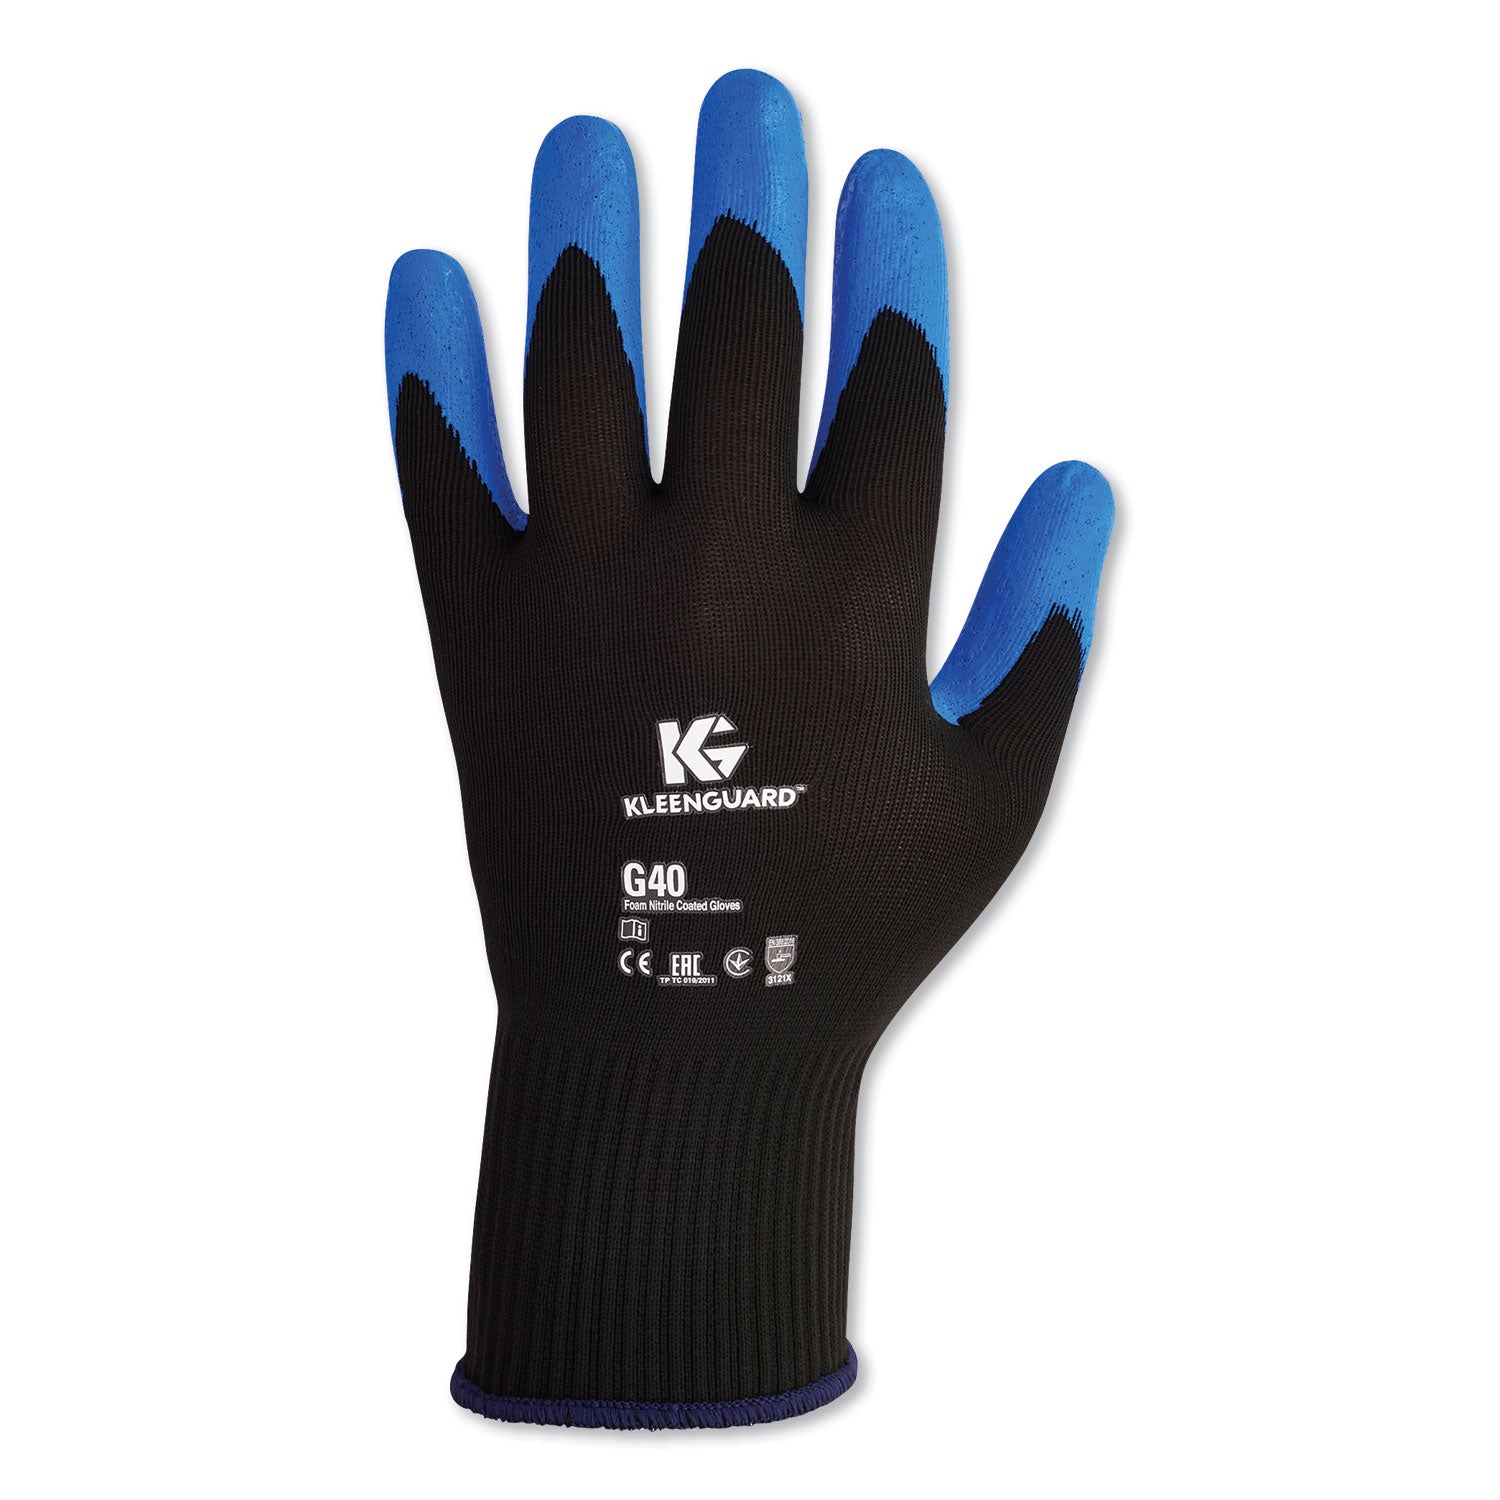 g40-foam-nitrile-coated-gloves-220-mm-length-small-size-7-blue-12-pairs_kcc40225 - 1